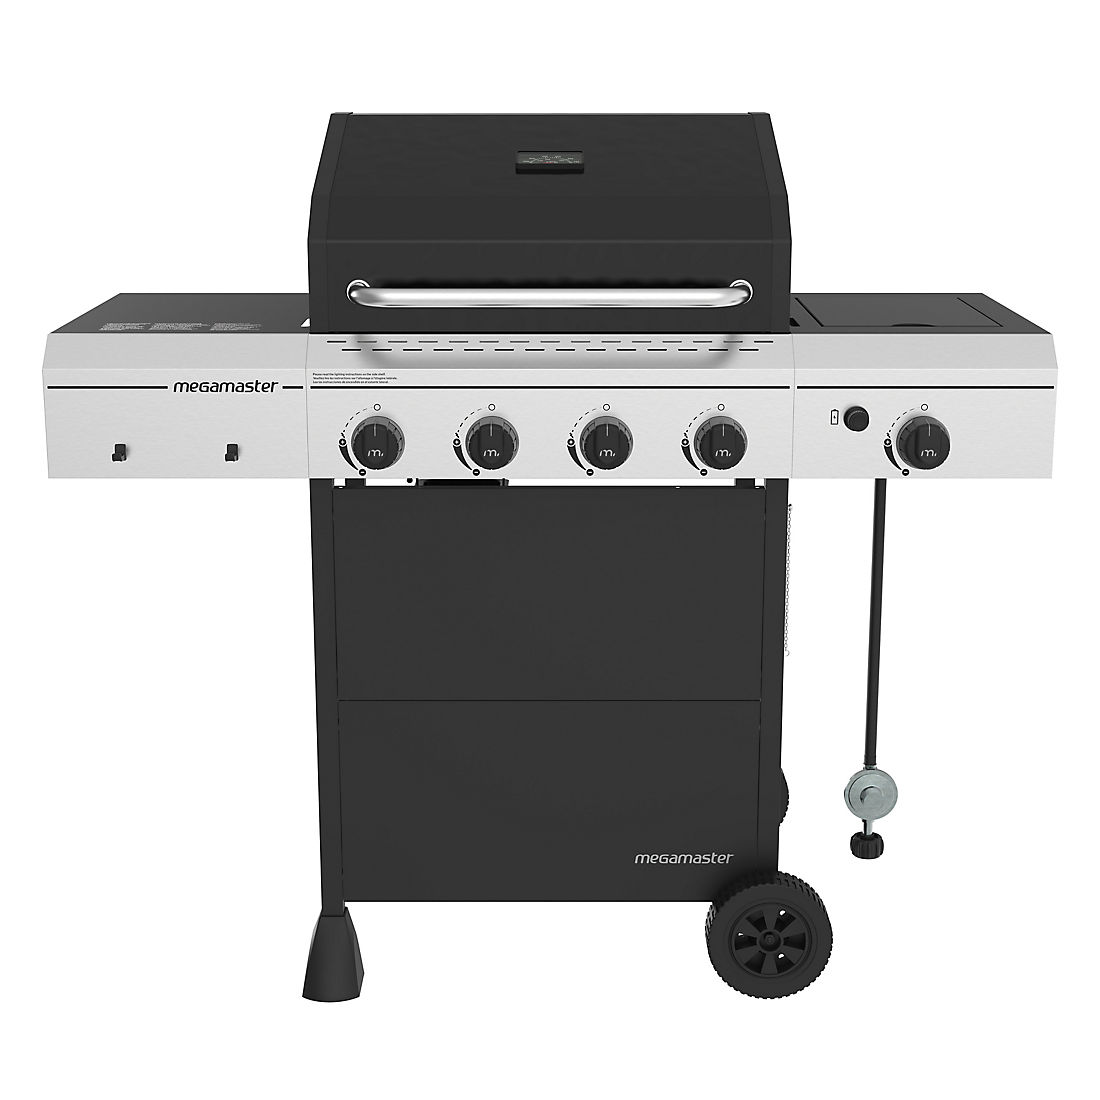 Megamaster 4 Burner Gas Grill With Side Burner Bjs Wholesale Club,How To Find An Apartment In Los Angeles